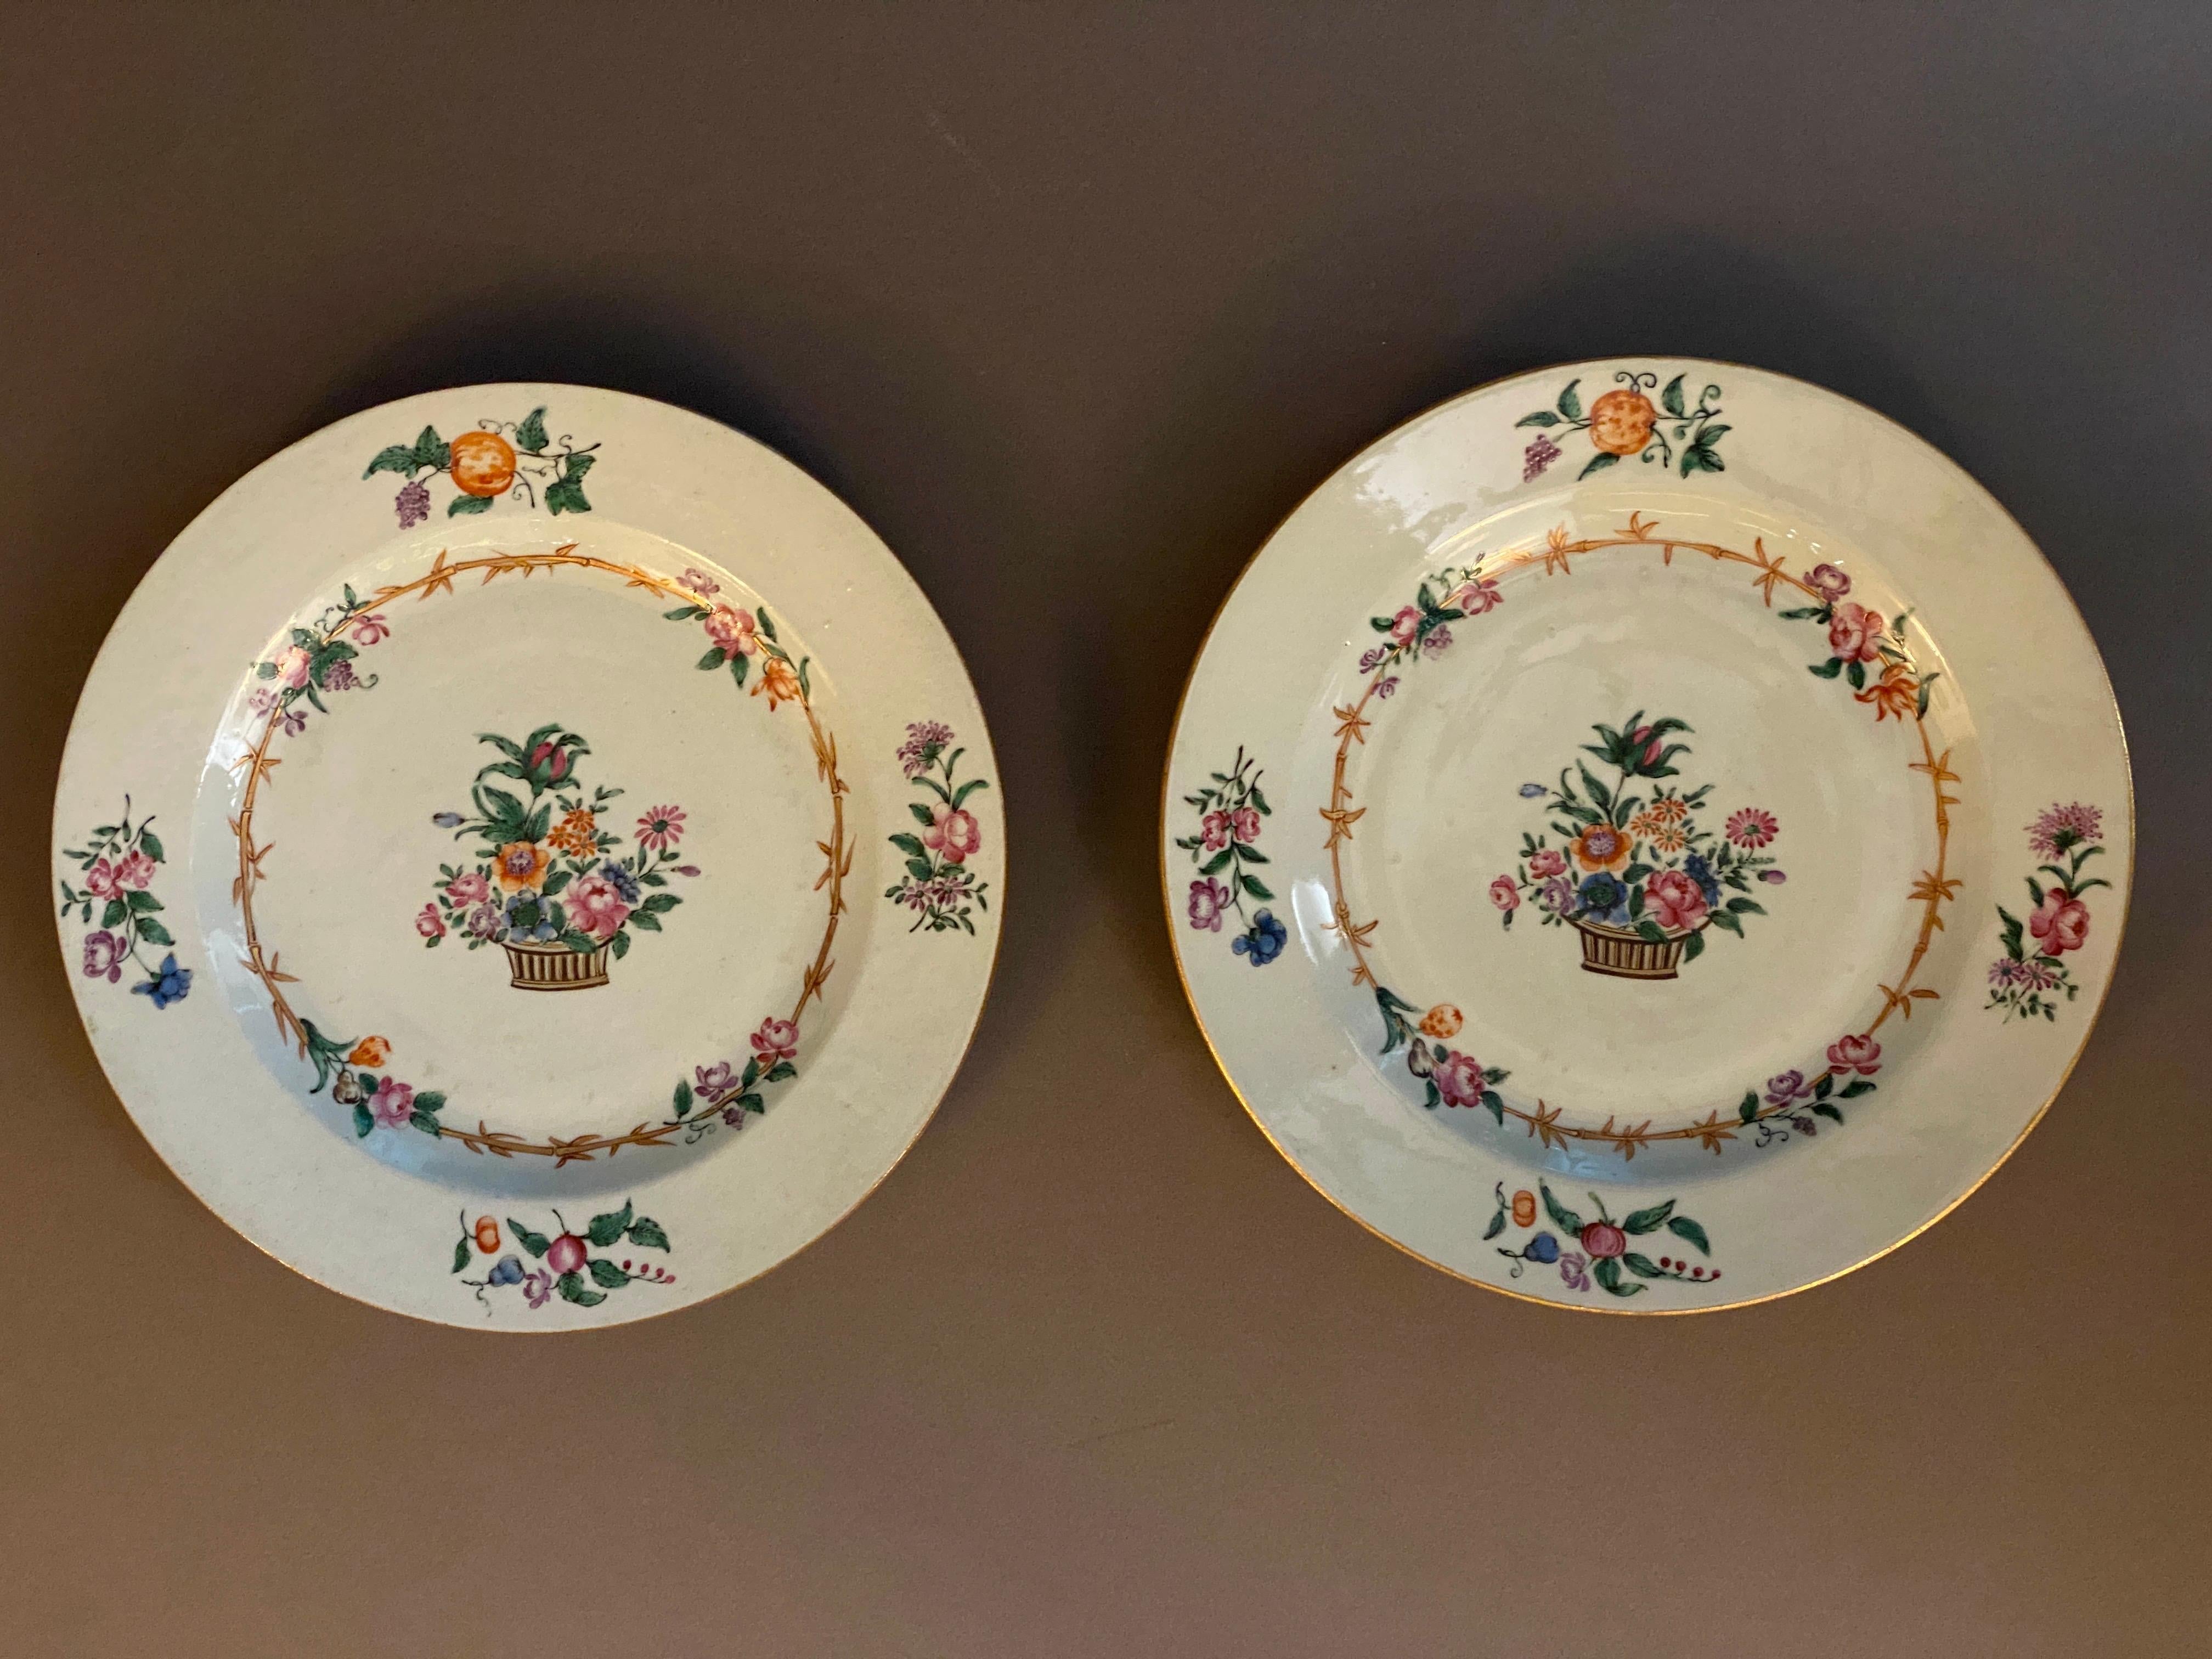 Pair of 18th century East India Company famille rose porcelain plates with a polychrome and gilded decor of basket, flowers and bamboos.

Minor enamel wear. One with a very small chip on the rear rim not visible from the front.